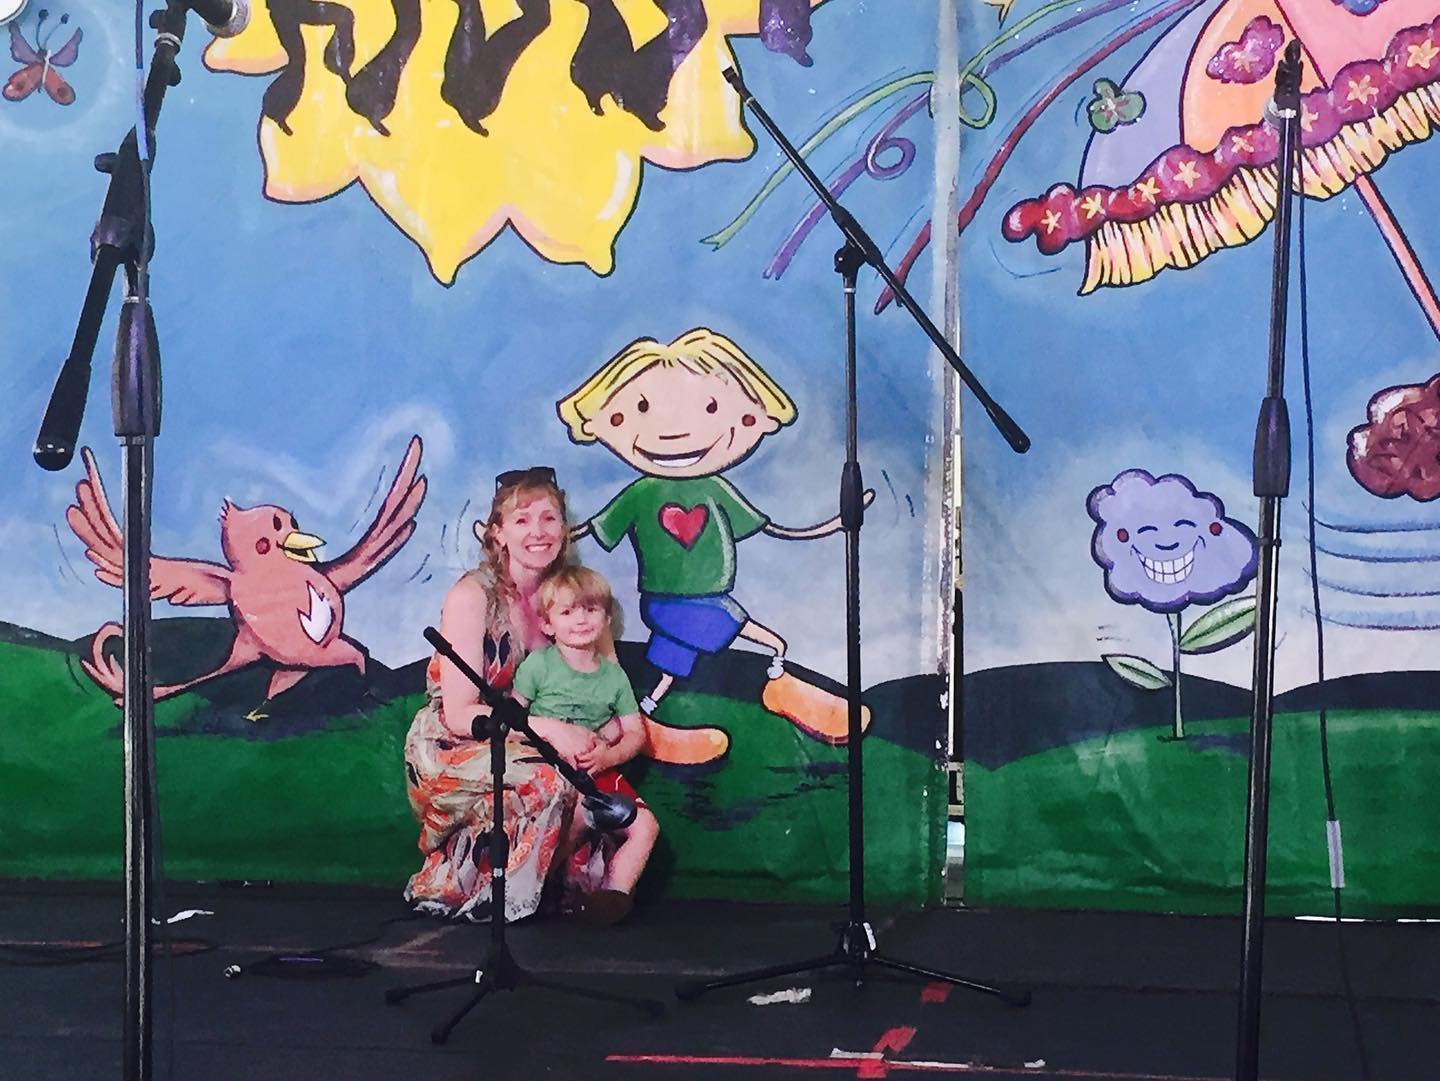 All this prep for @jazzfest has me nostalgic 🥹

Before my son was born (he is now 12 😱), I painted this stage backdrop for the Kids&rsquo; Tent at Jazz Fest.

The character in the middle happened to resemble him as if I had &ldquo;dreamed him into 